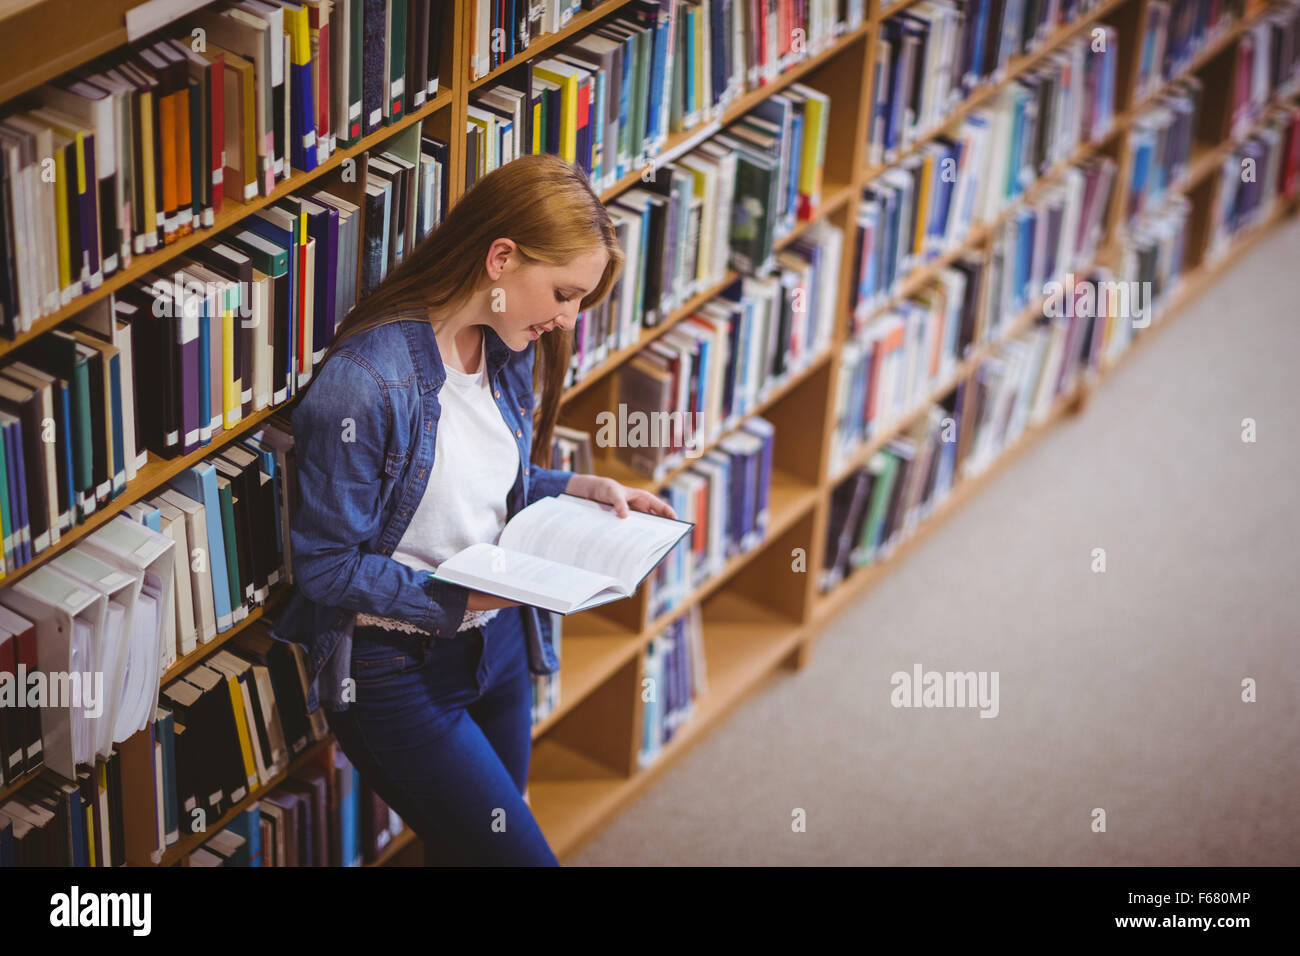 Student reading book in library leaning against bookshelves Stock Photo